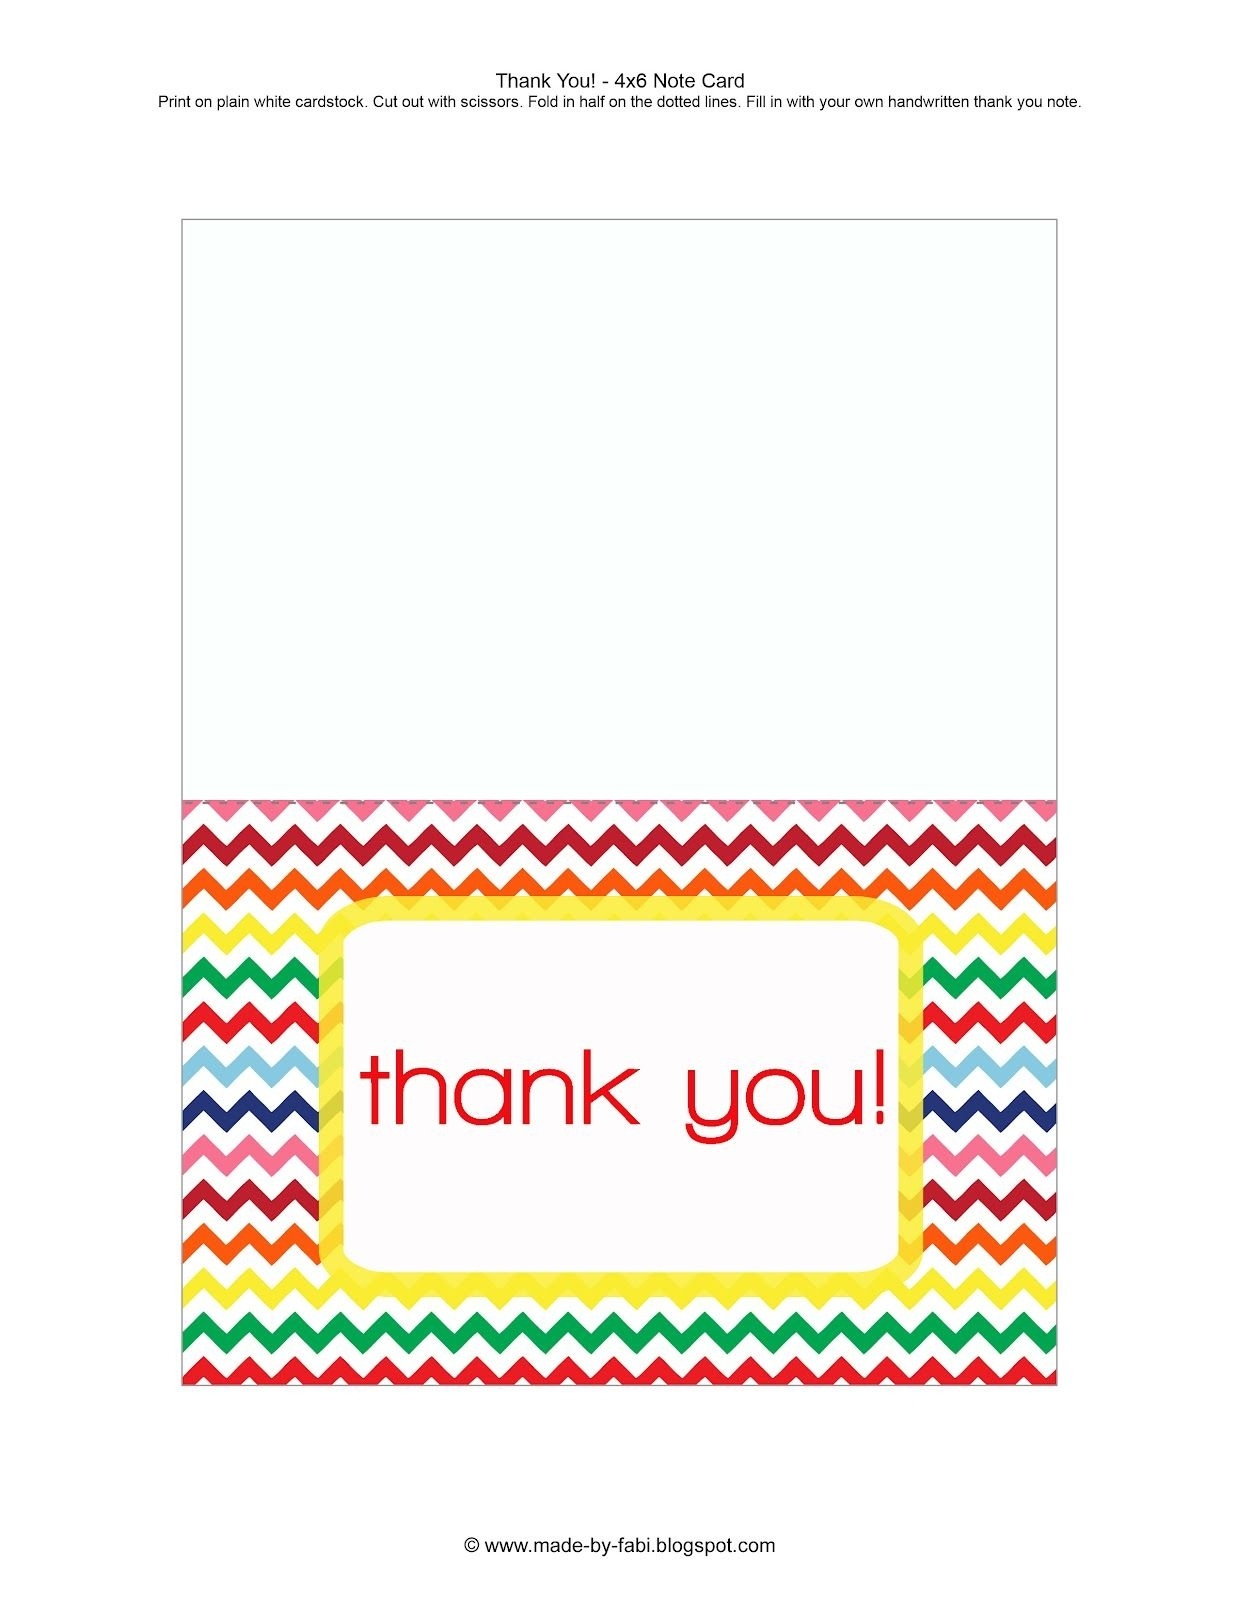 Printable Thank You Cards For Students - Printable Cards - Free Printable Thinking Of You Cards